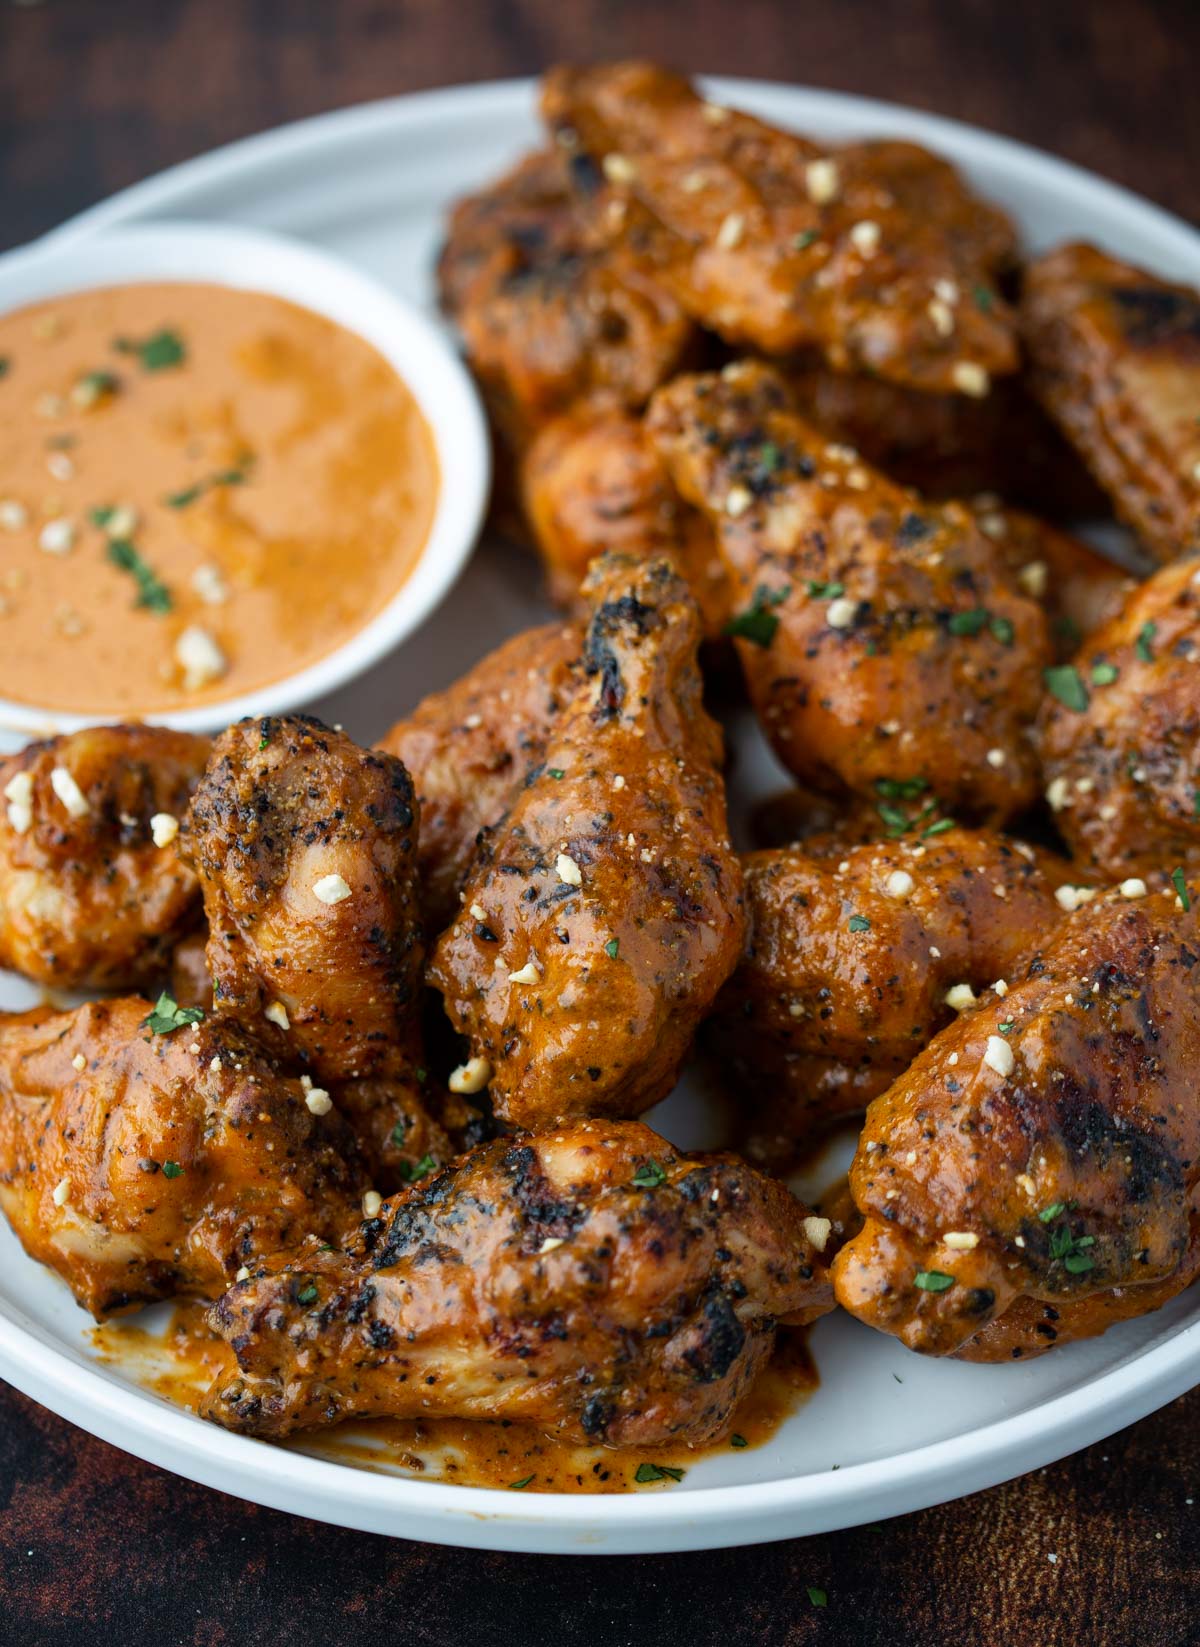 Grilled Chicken Wings with Spicy Peanut Sauce on a platter with some dipping sauce